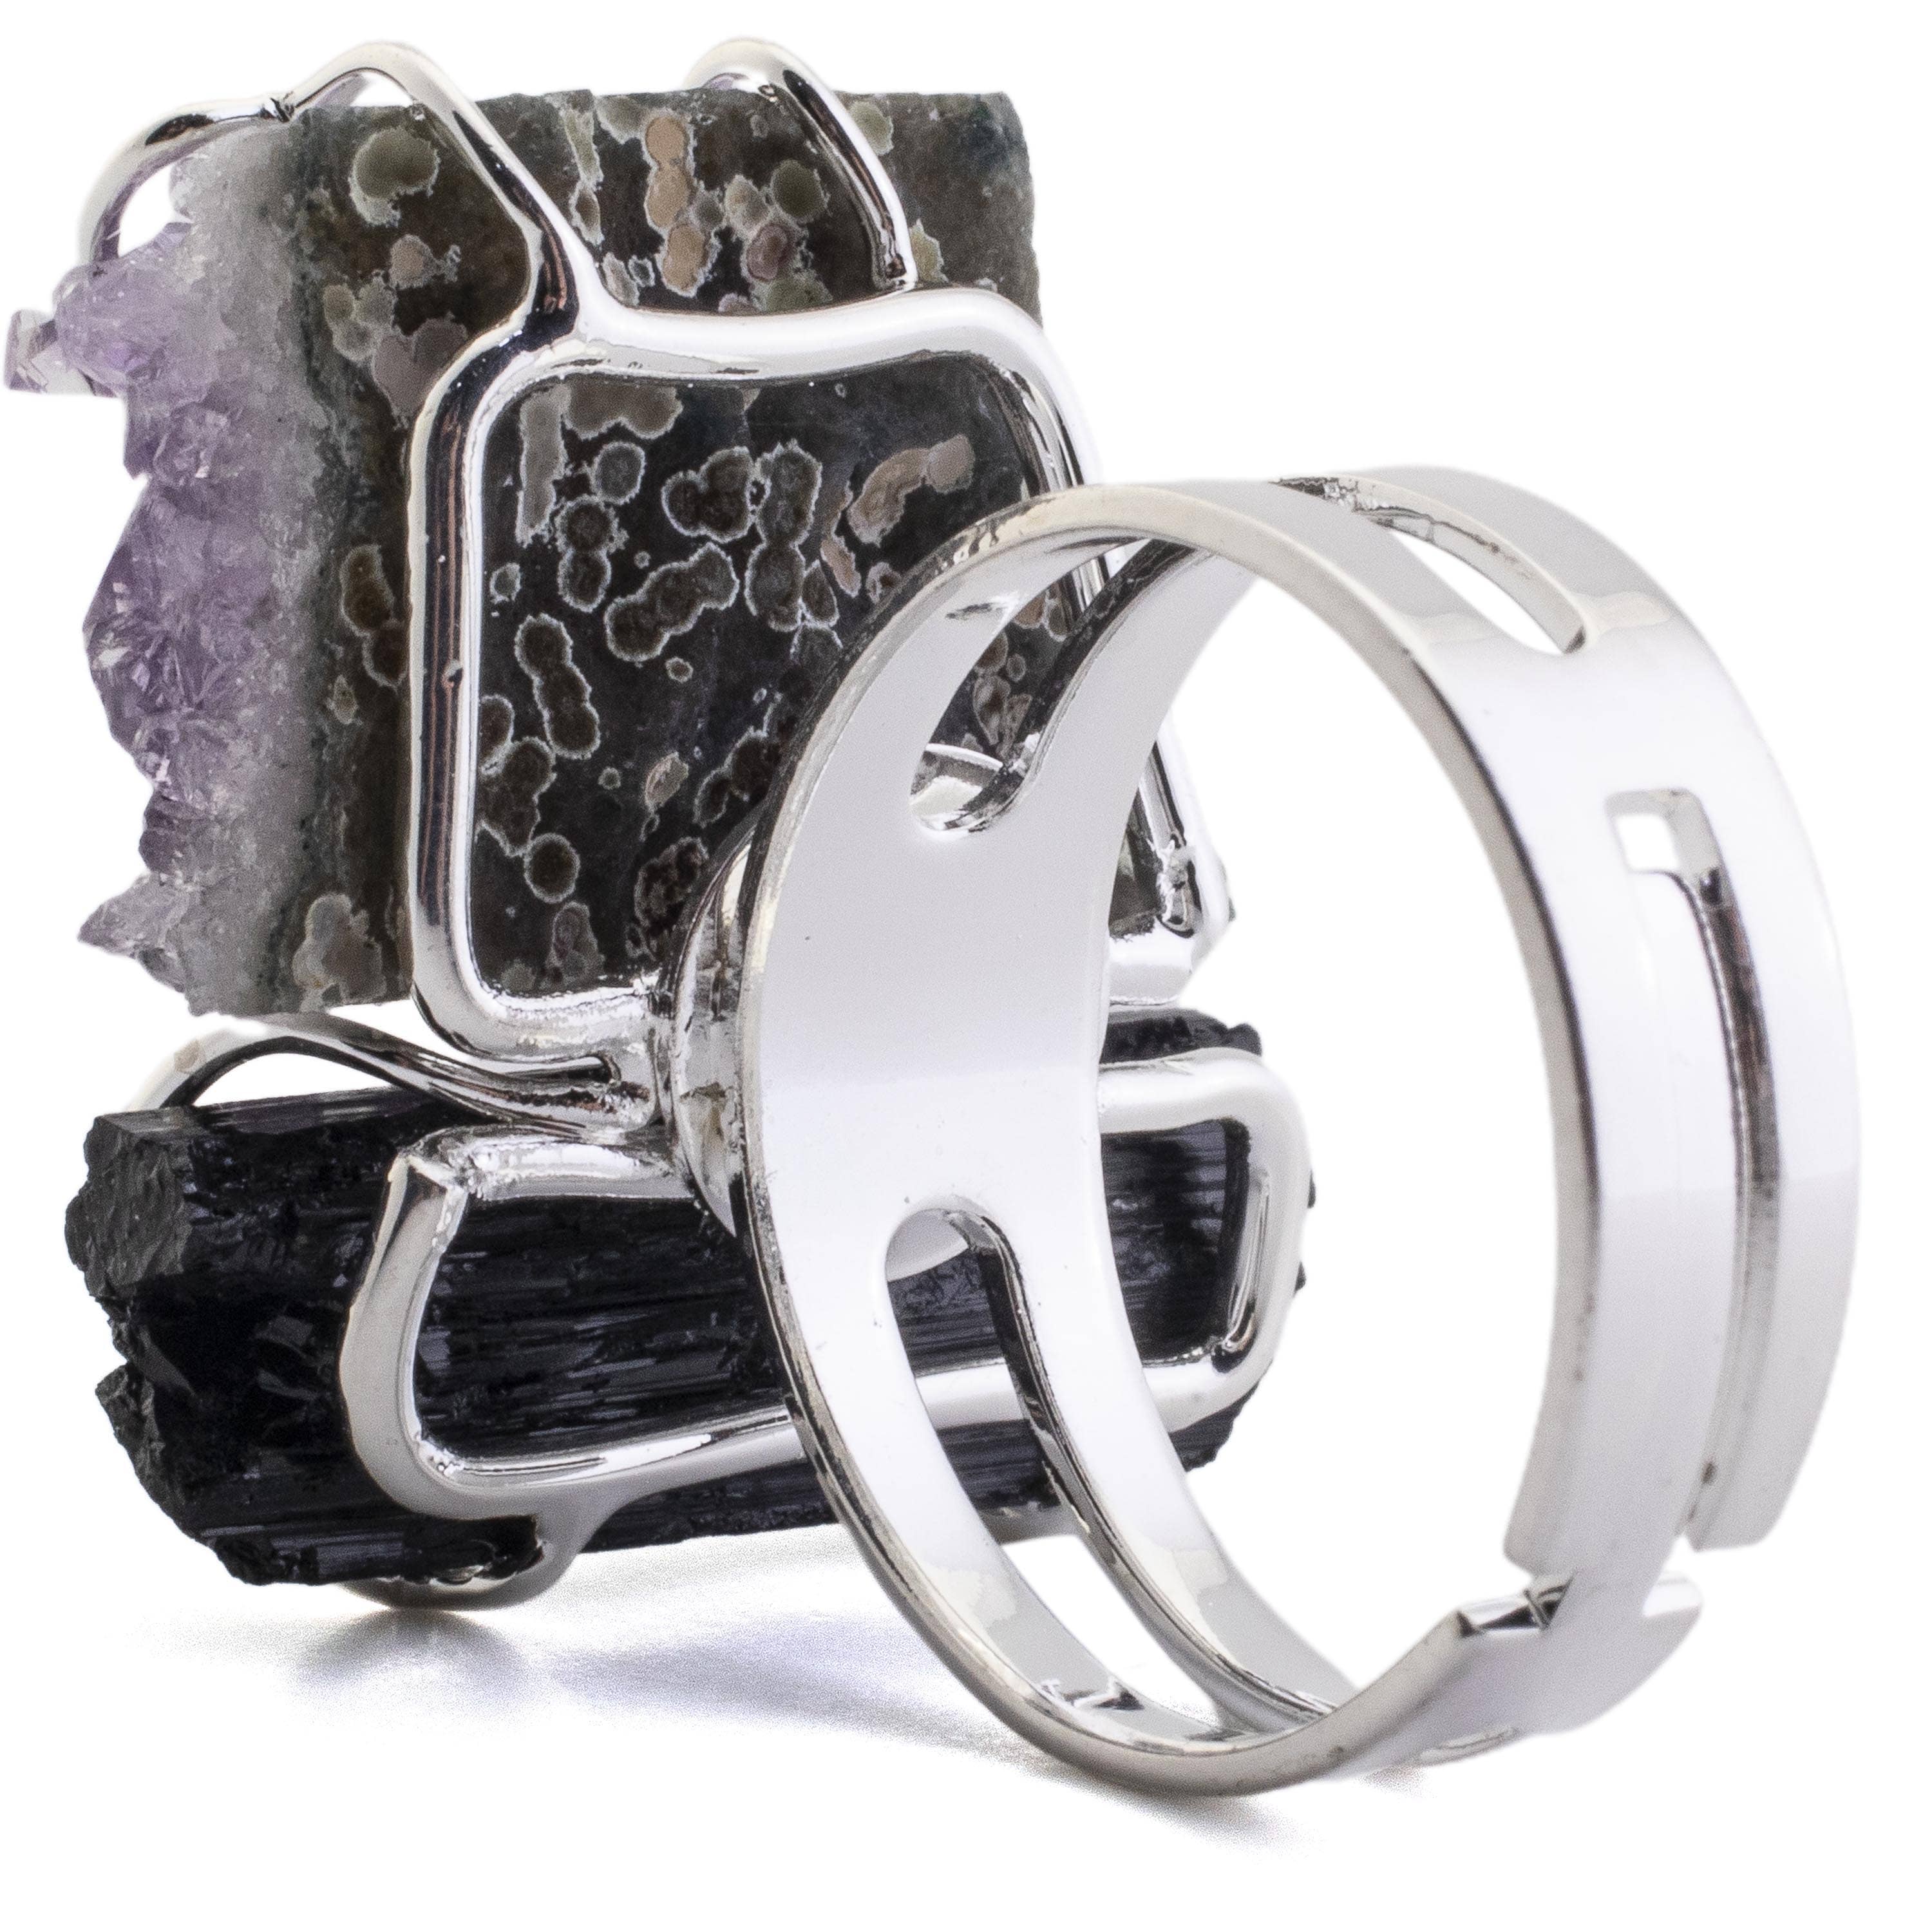 Kalifano Crystal Jewelry Amethyst and Black Tourmaline Adjustable Ring CJR-507-A+T